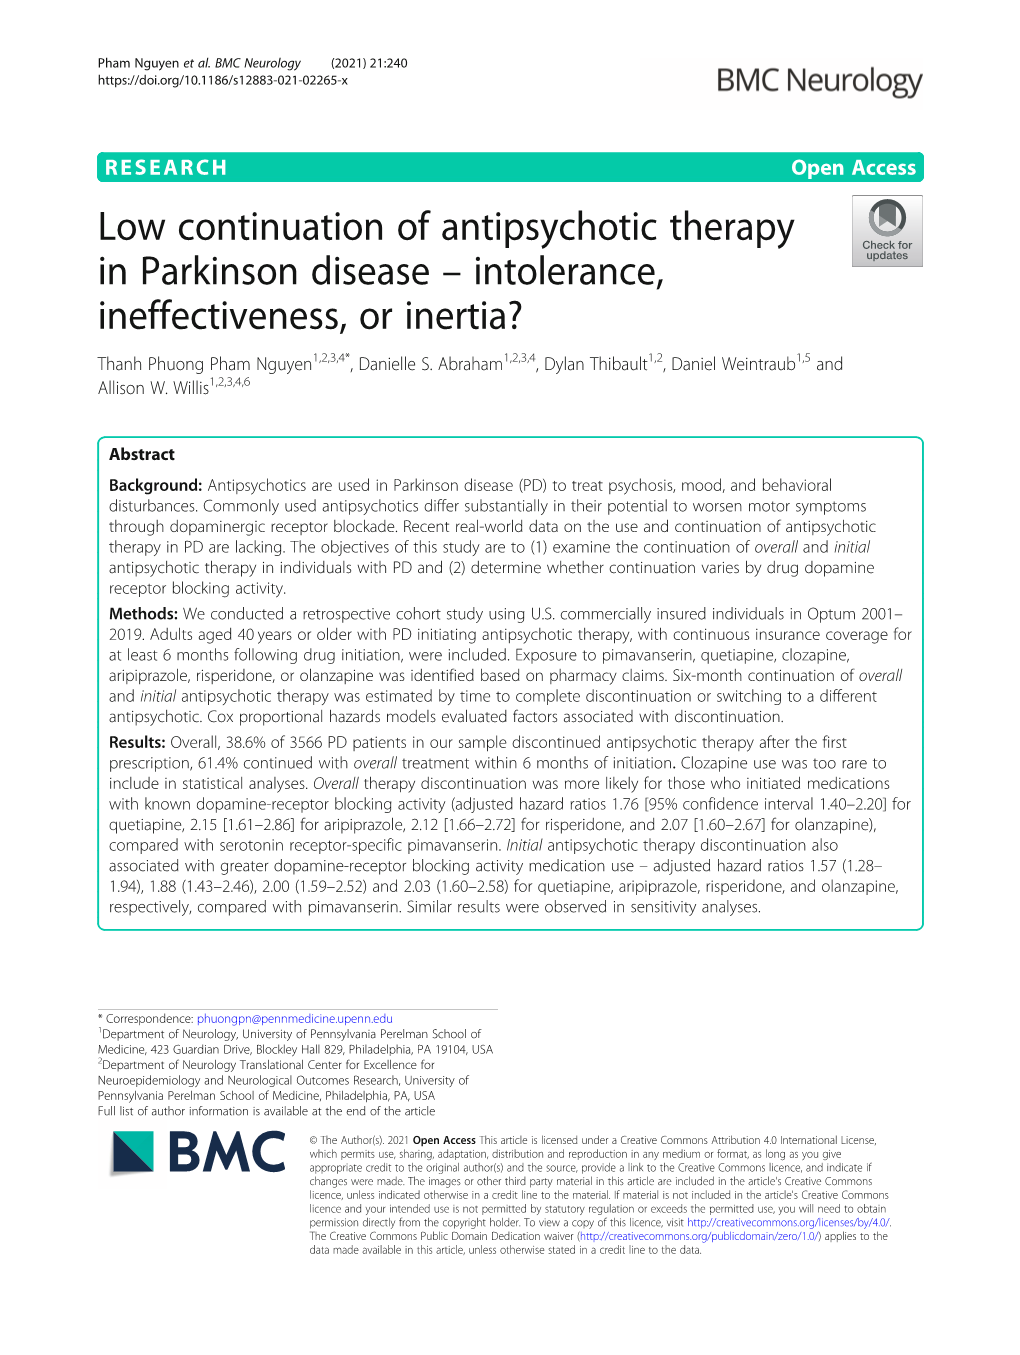 Low Continuation of Antipsychotic Therapy in Parkinson Disease – Intolerance, Ineffectiveness, Or Inertia? Thanh Phuong Pham Nguyen1,2,3,4*, Danielle S